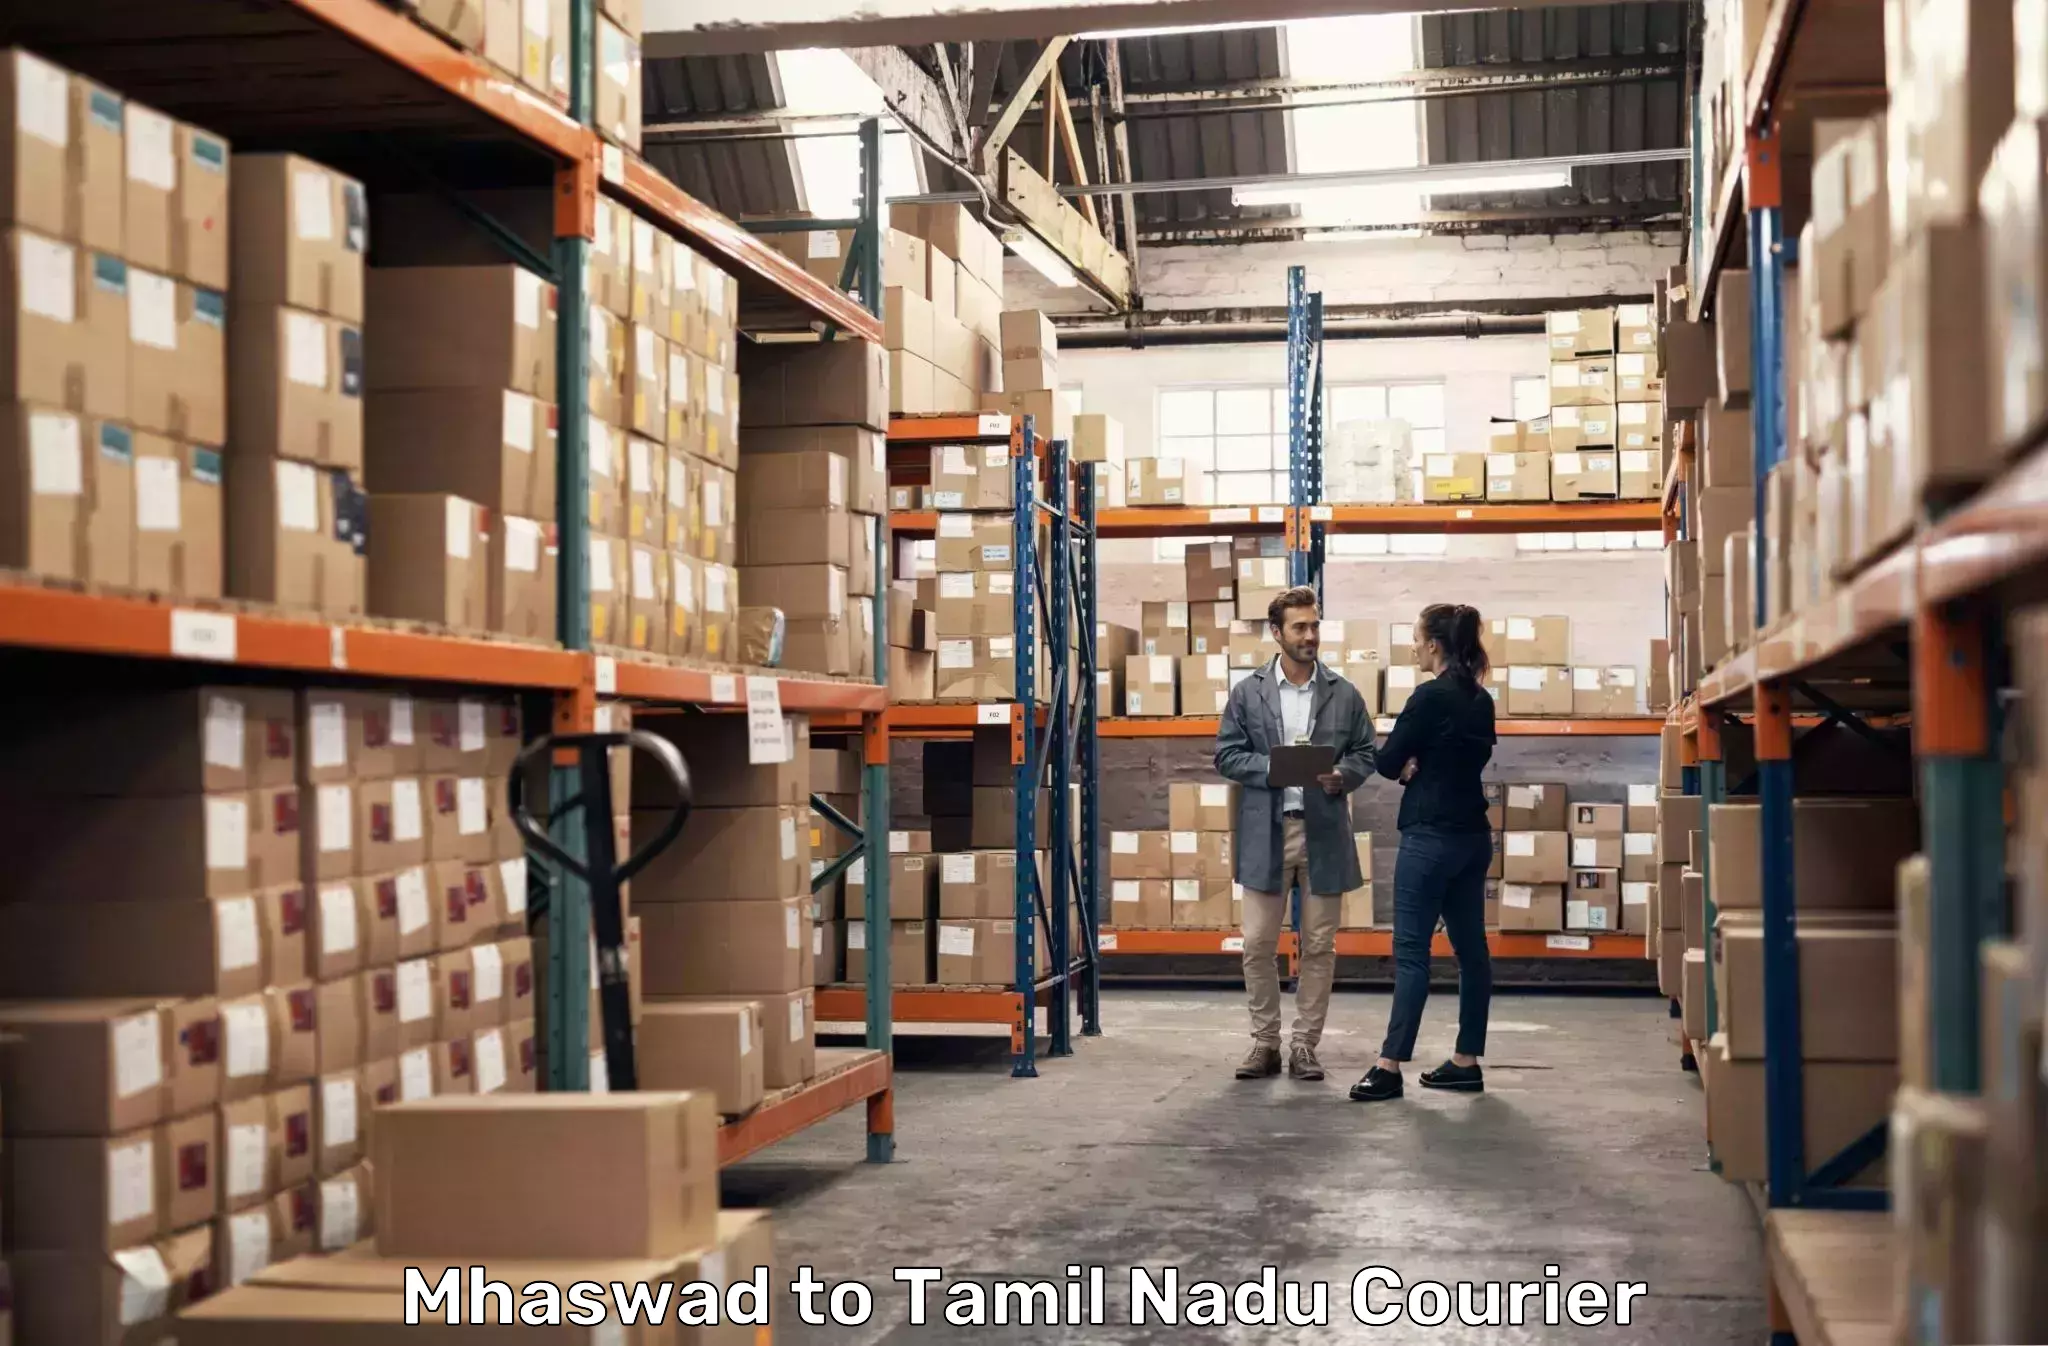 Advanced courier platforms Mhaswad to Erode